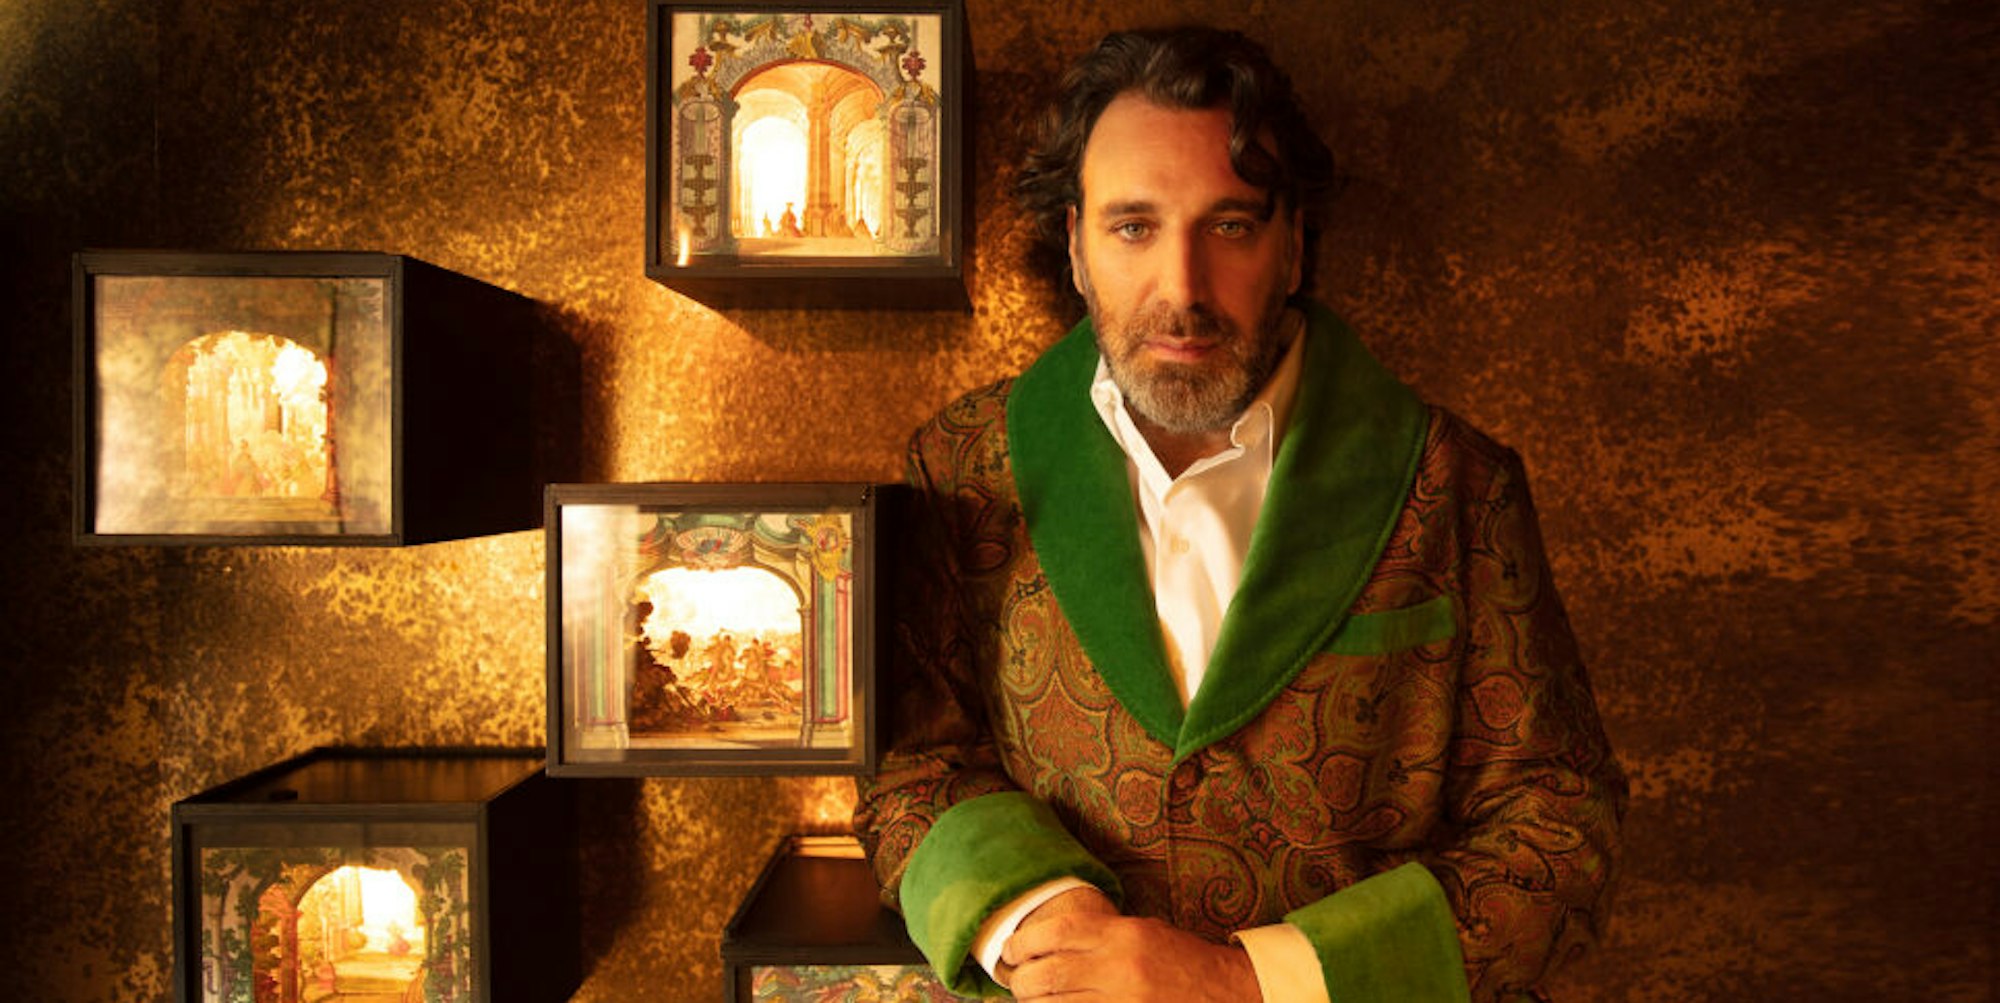 Chilly Gonzales im Festtags-Morgenmantel